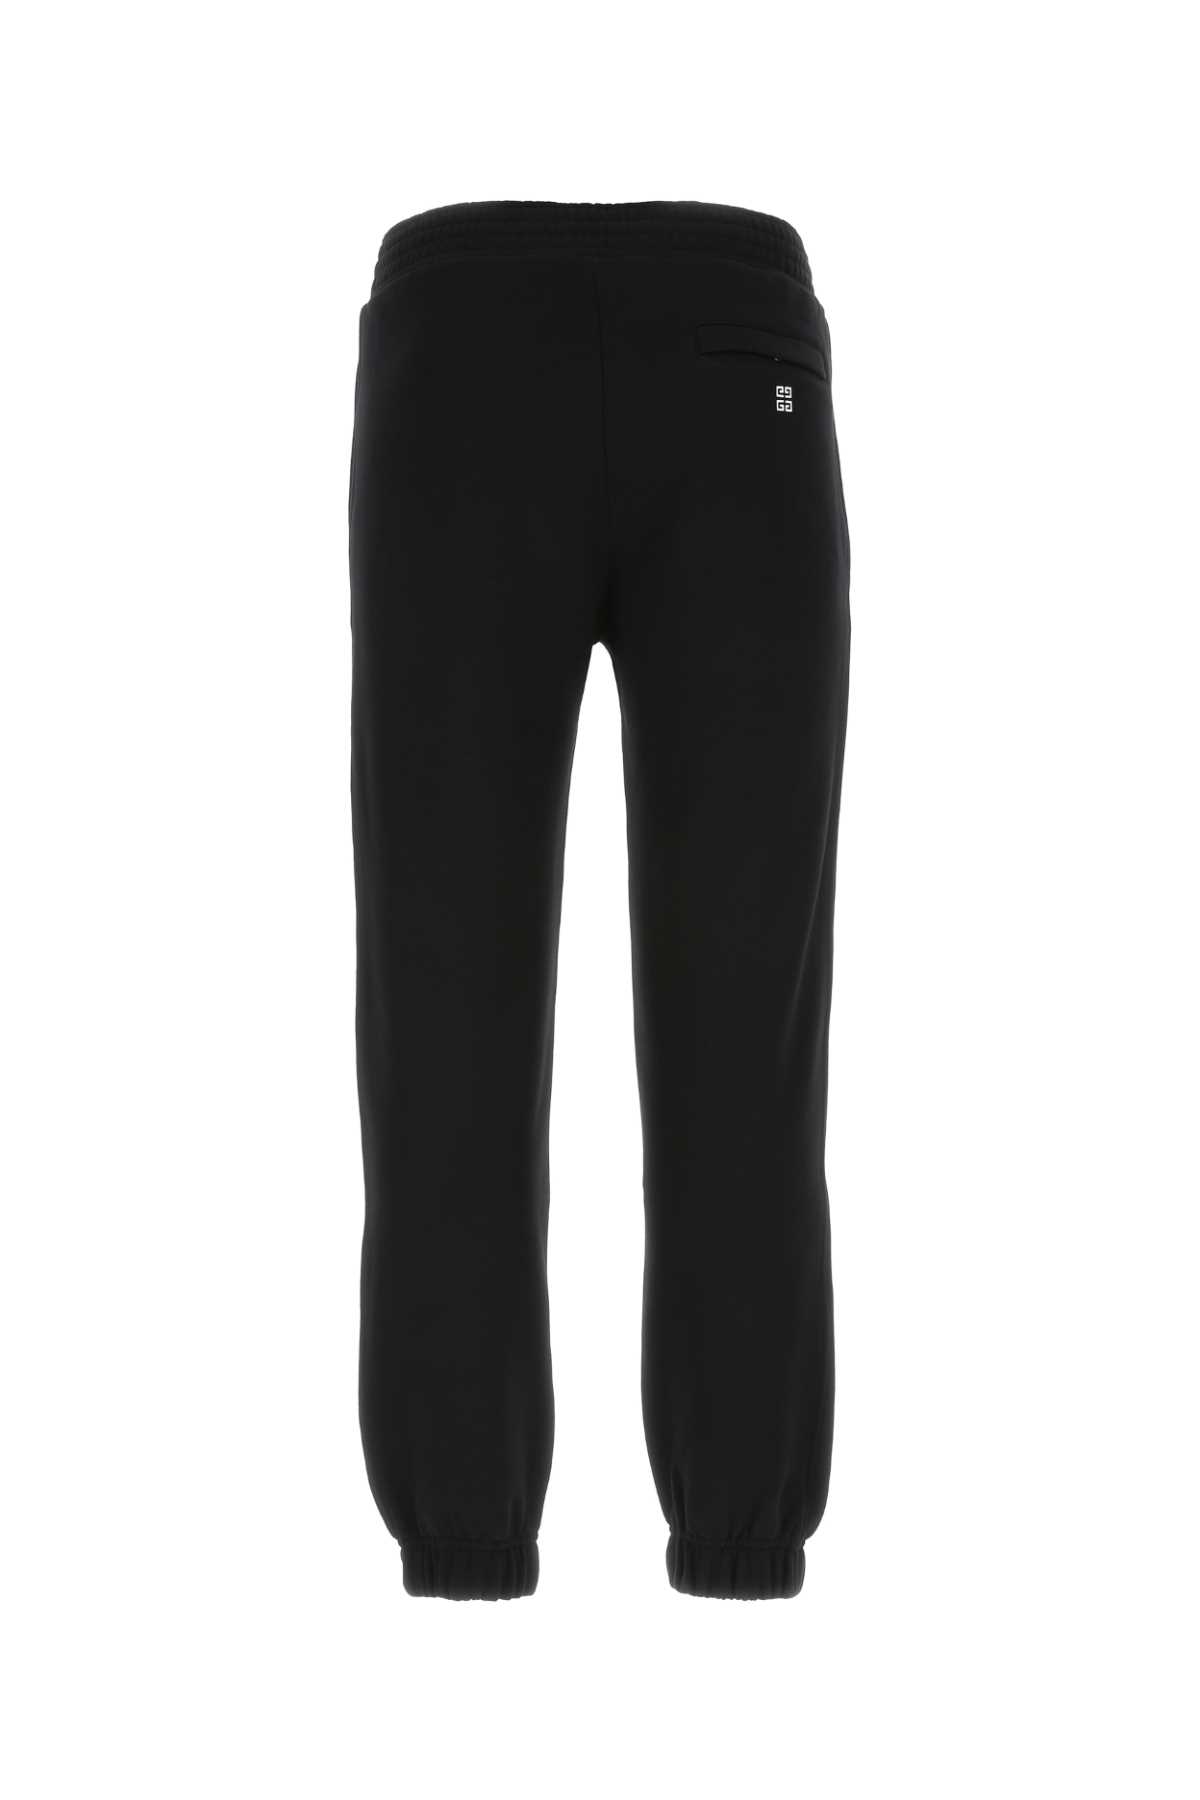 Givenchy Black Cotton Joggers In 001